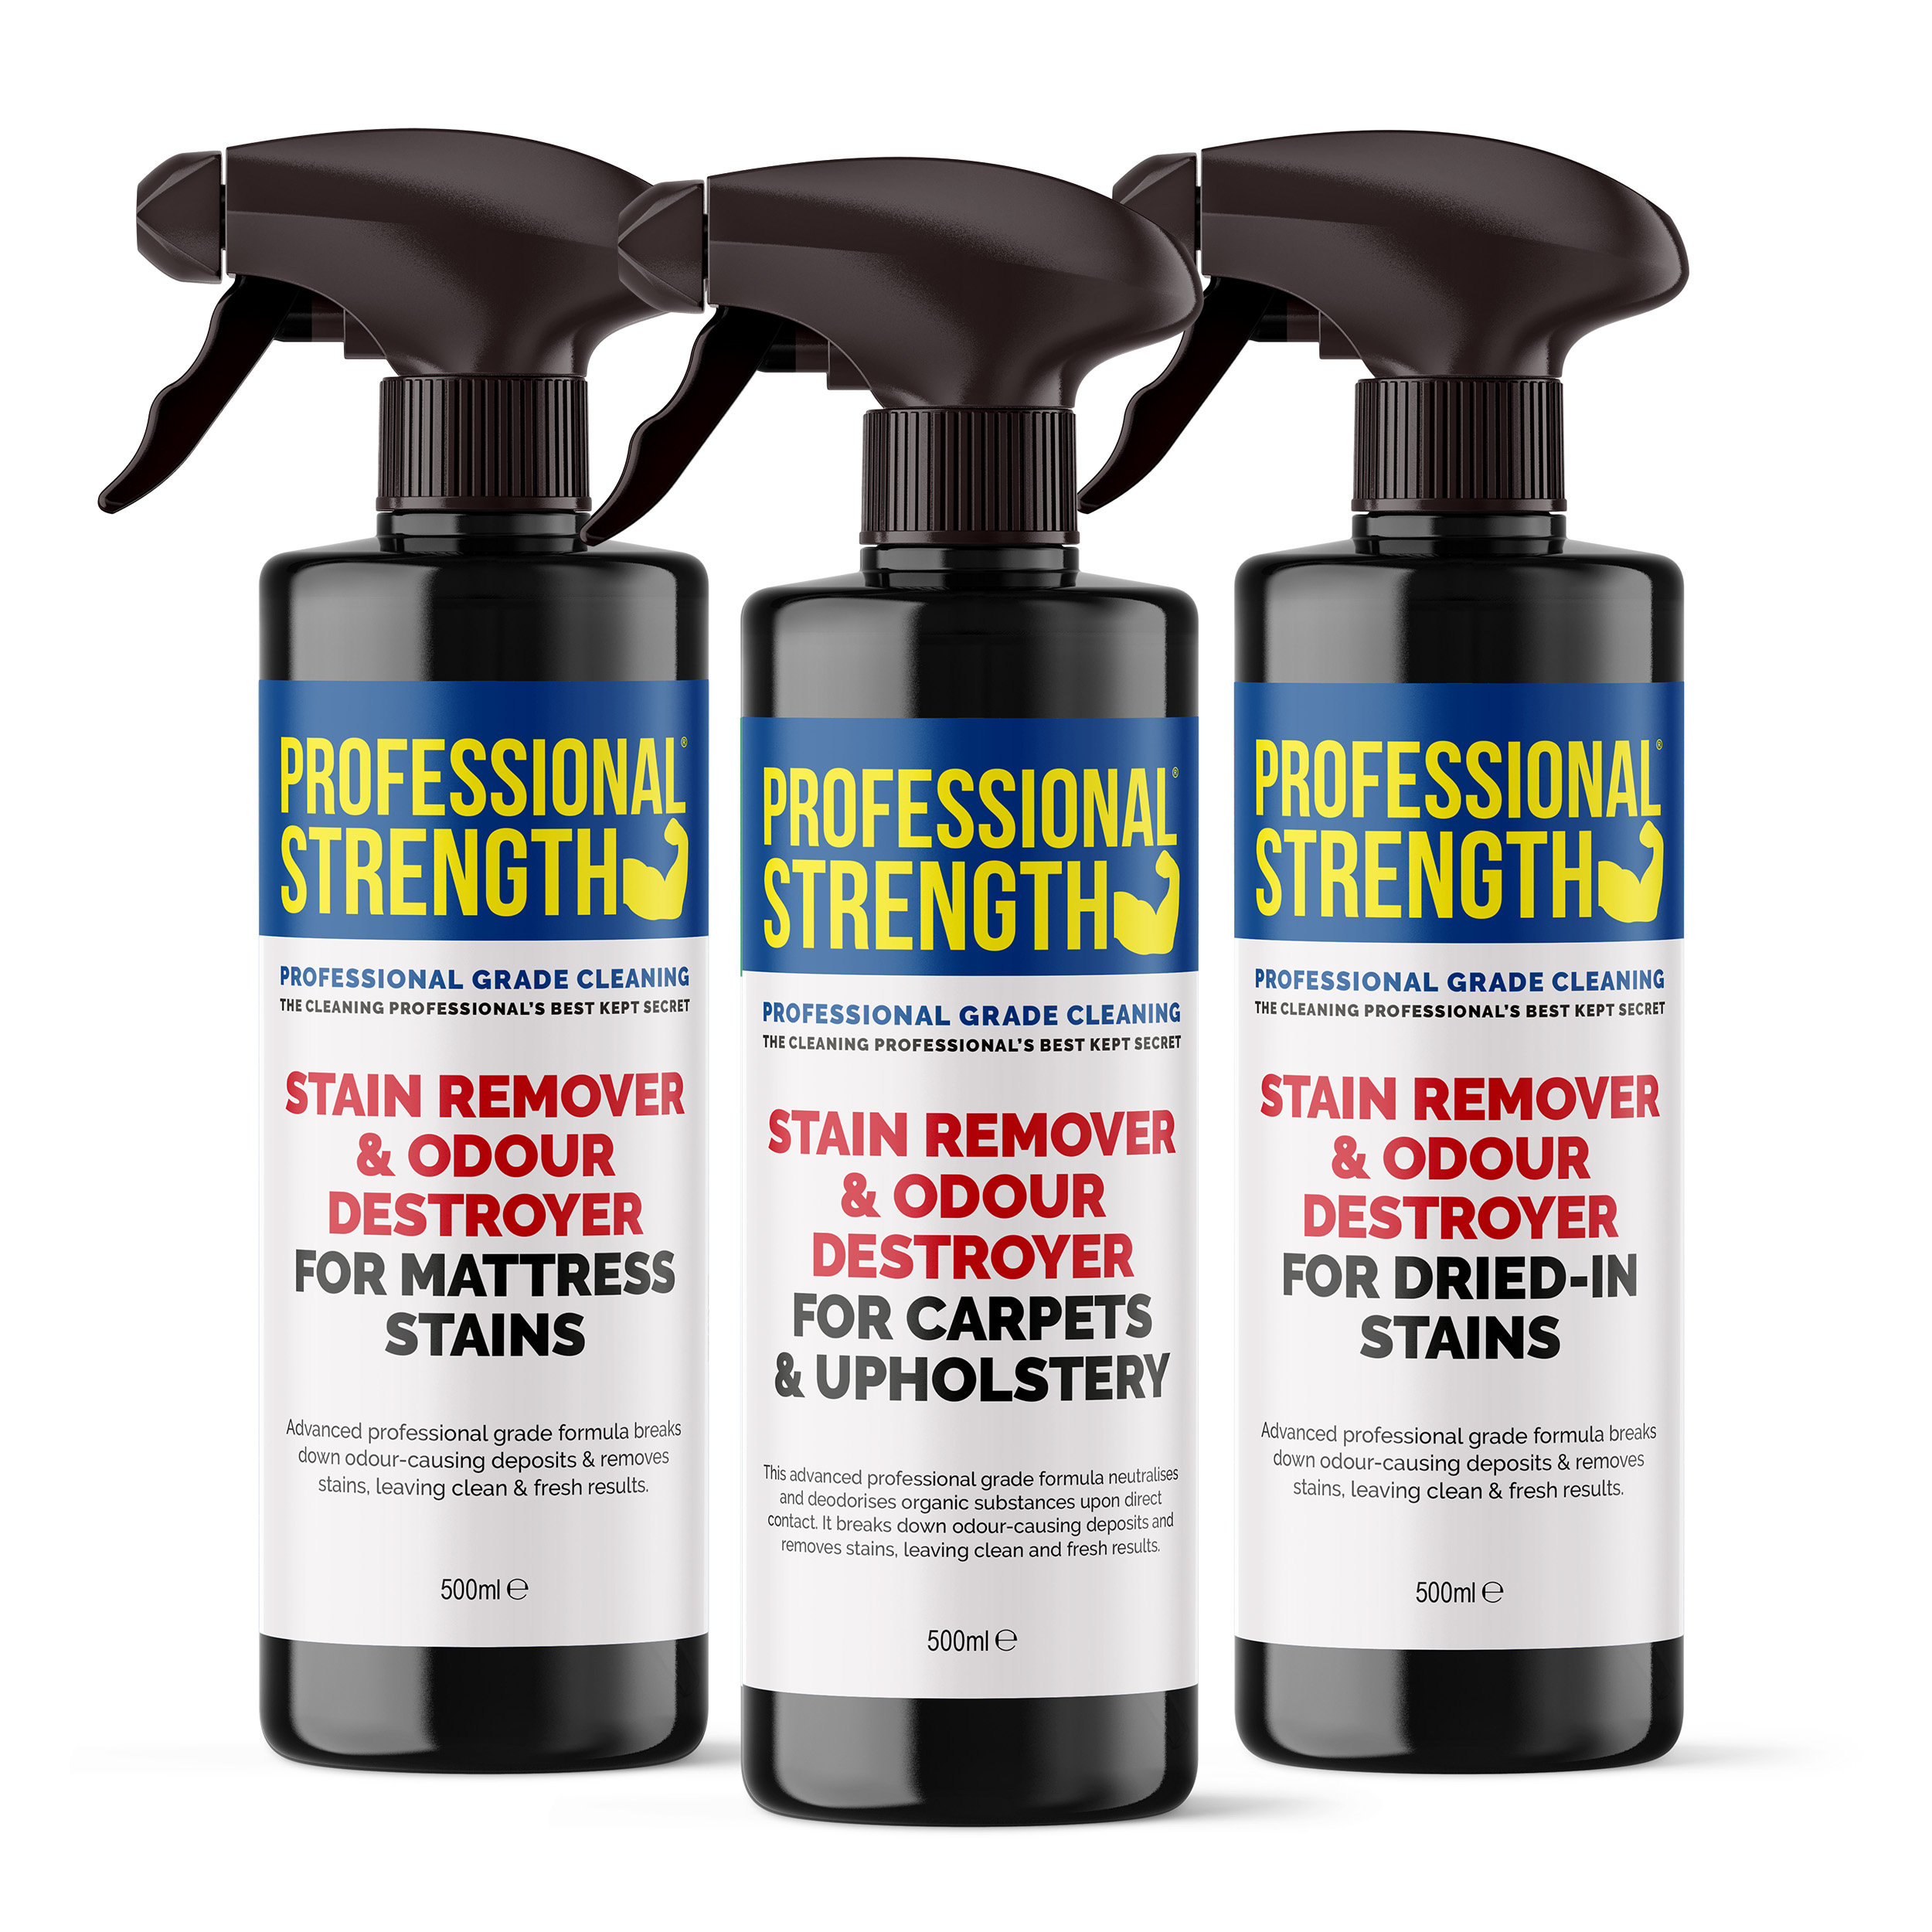 Professional Strength Ultimate Stain Treatment Pack